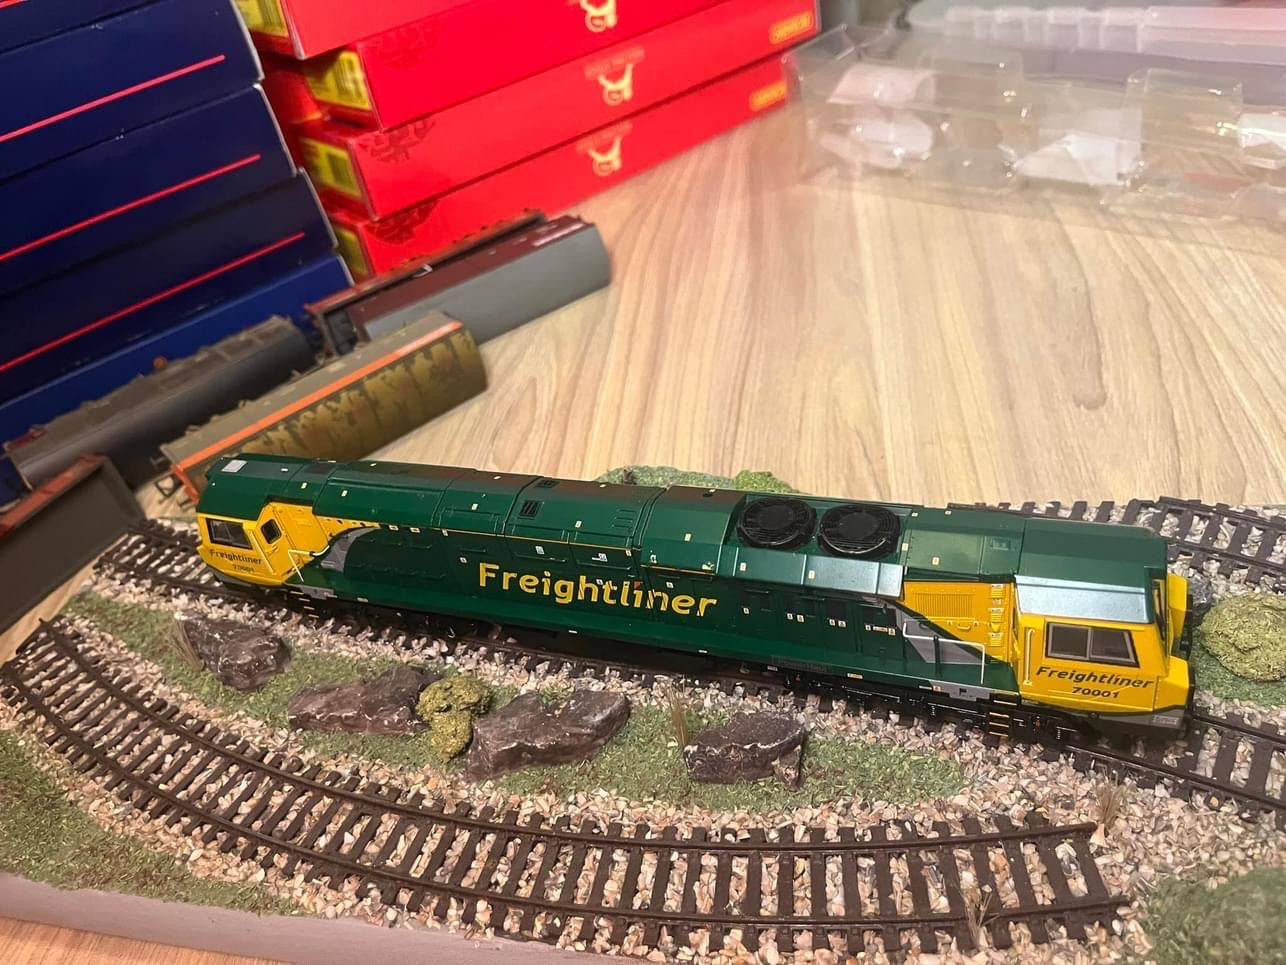 Bachmann, General Electric, Class 70, No 70001 “PowerHaul” in Freigtliner Green and Yellow, Special Edition. DCC Sound Fitted.